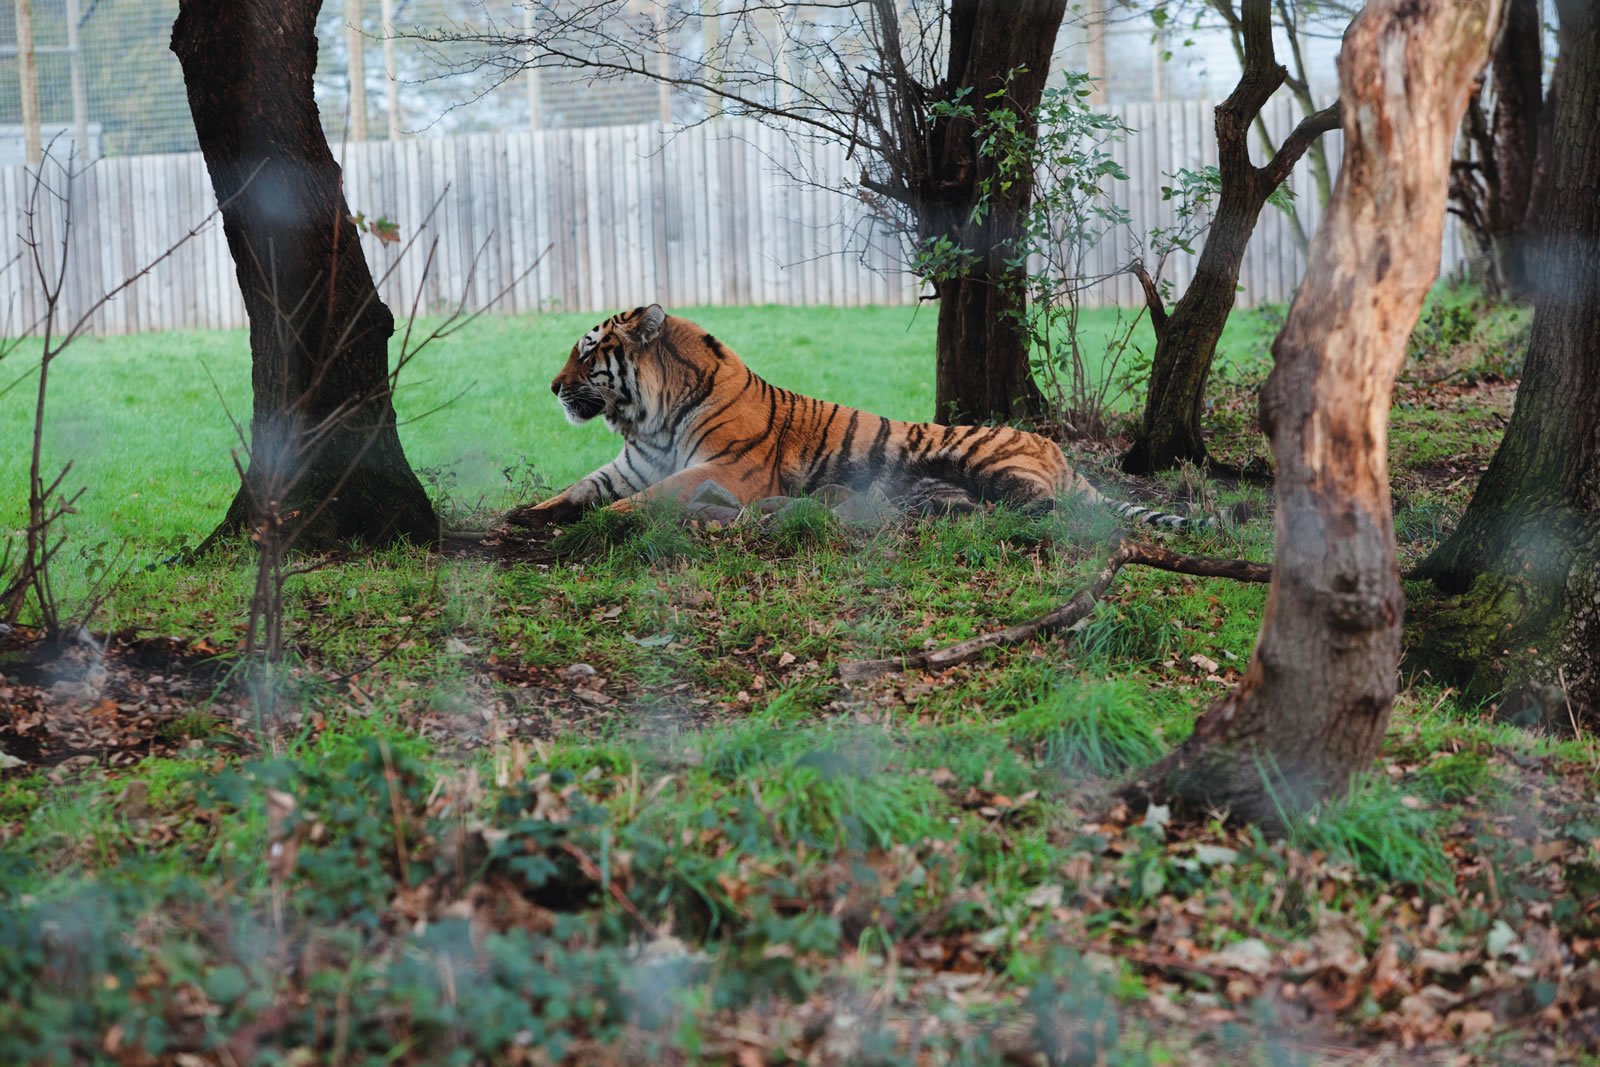 Image name tiger in zoo the 1 image from the post Awesome Attractions in Yorkshire.com.